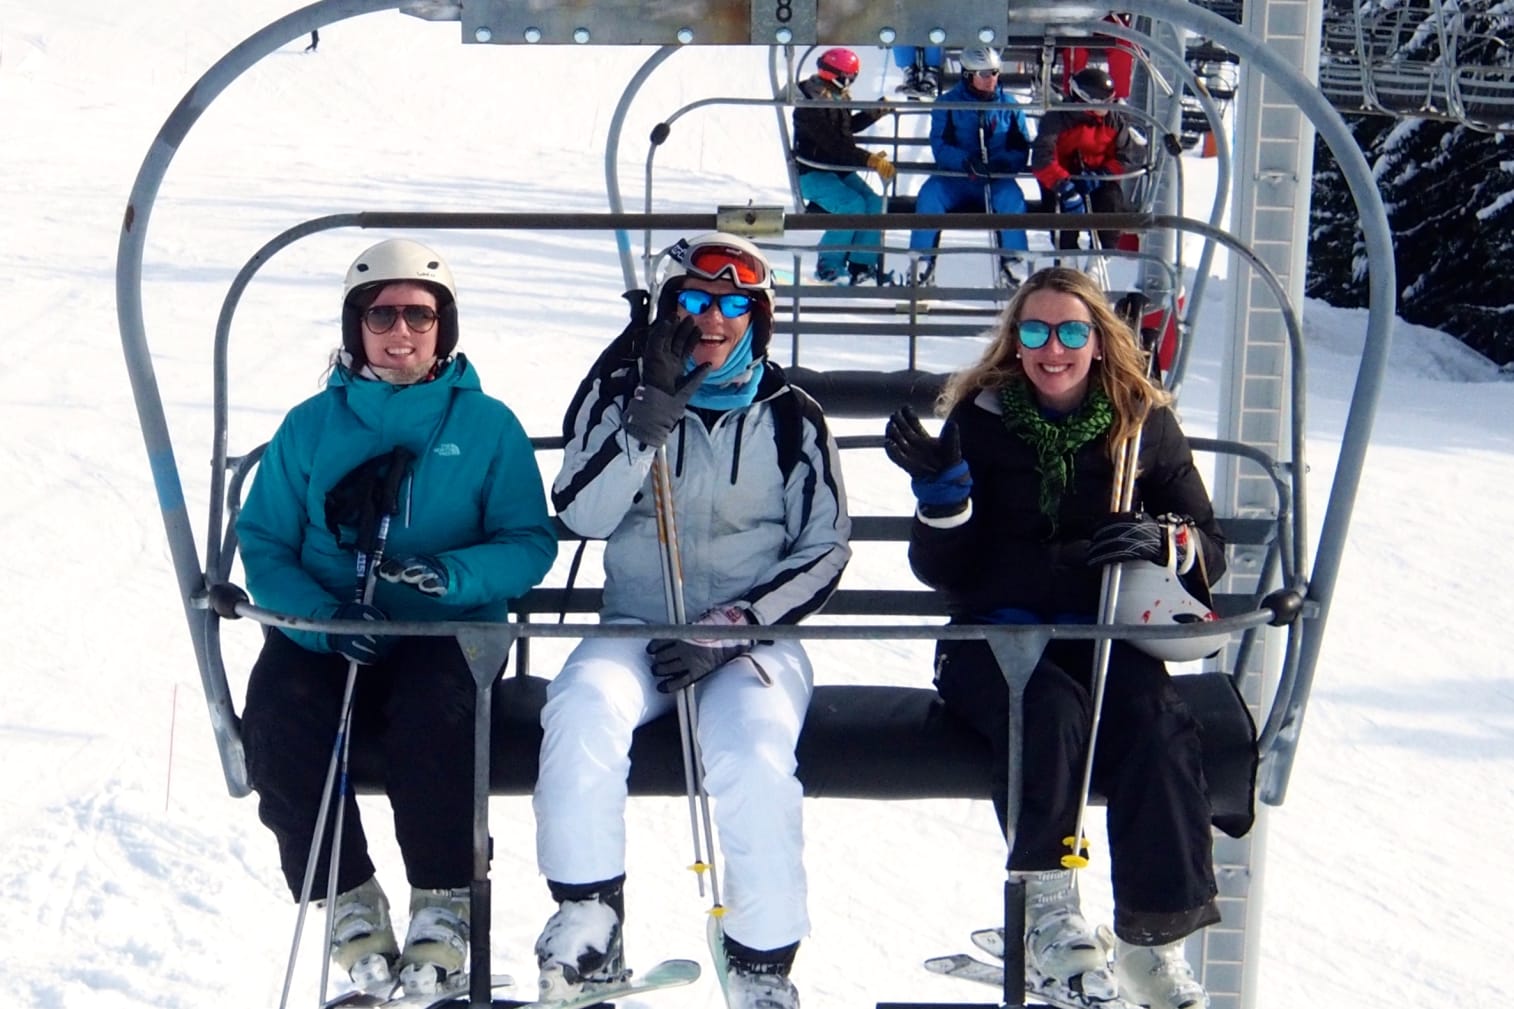 Skiers on chairlift